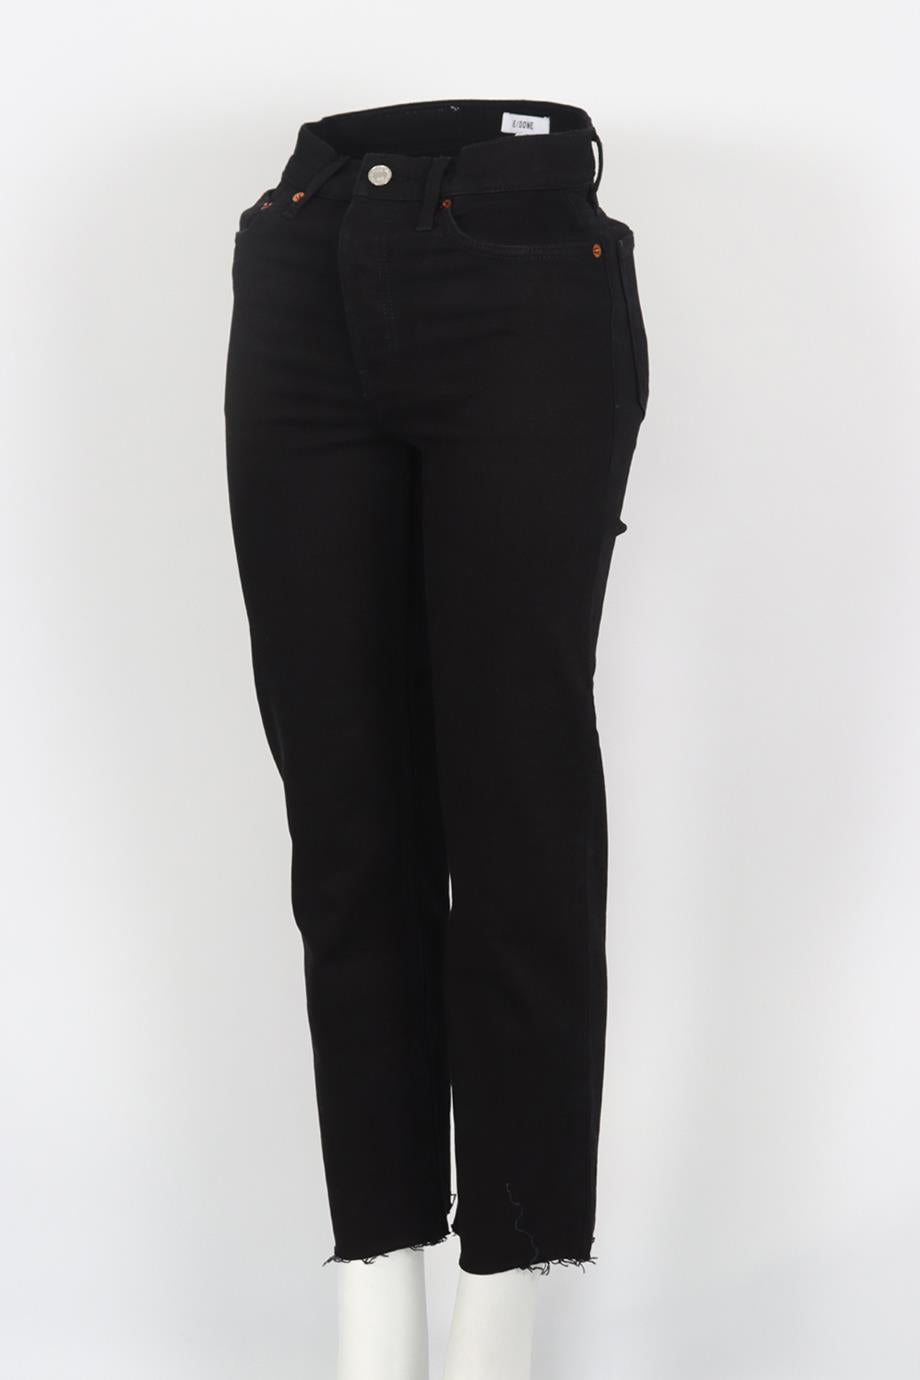 RE/DONE HIGH RISE STRAIGHT LEG JEANS W25 UK 6-8